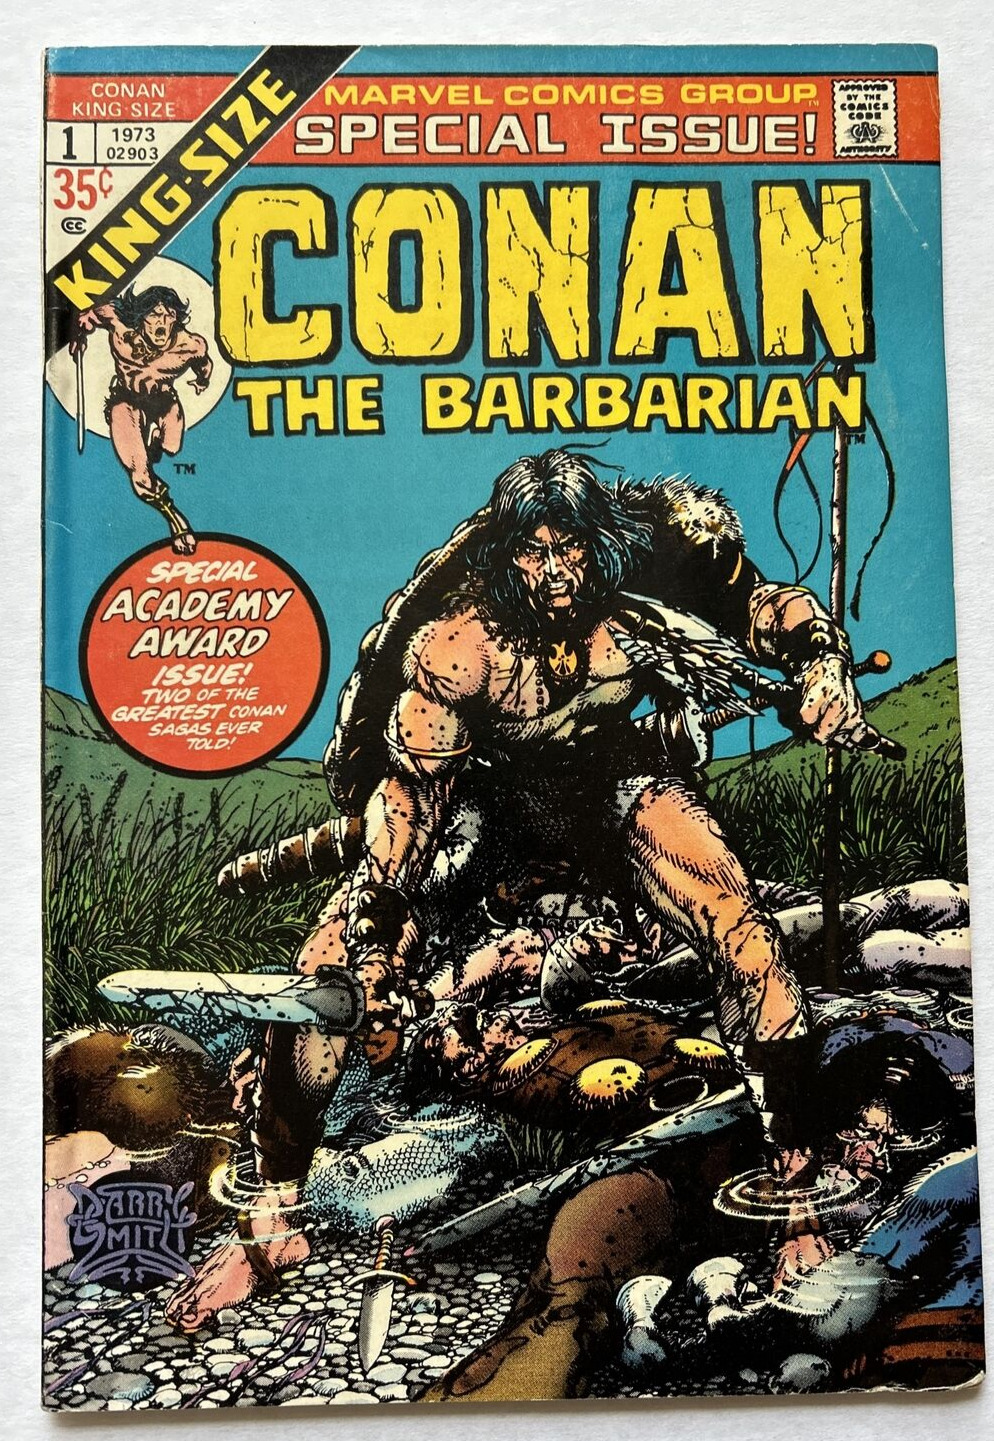 CONAN The Barbarian King Size #1 Special Issue - Marvel 1973 Barry Smith Cover